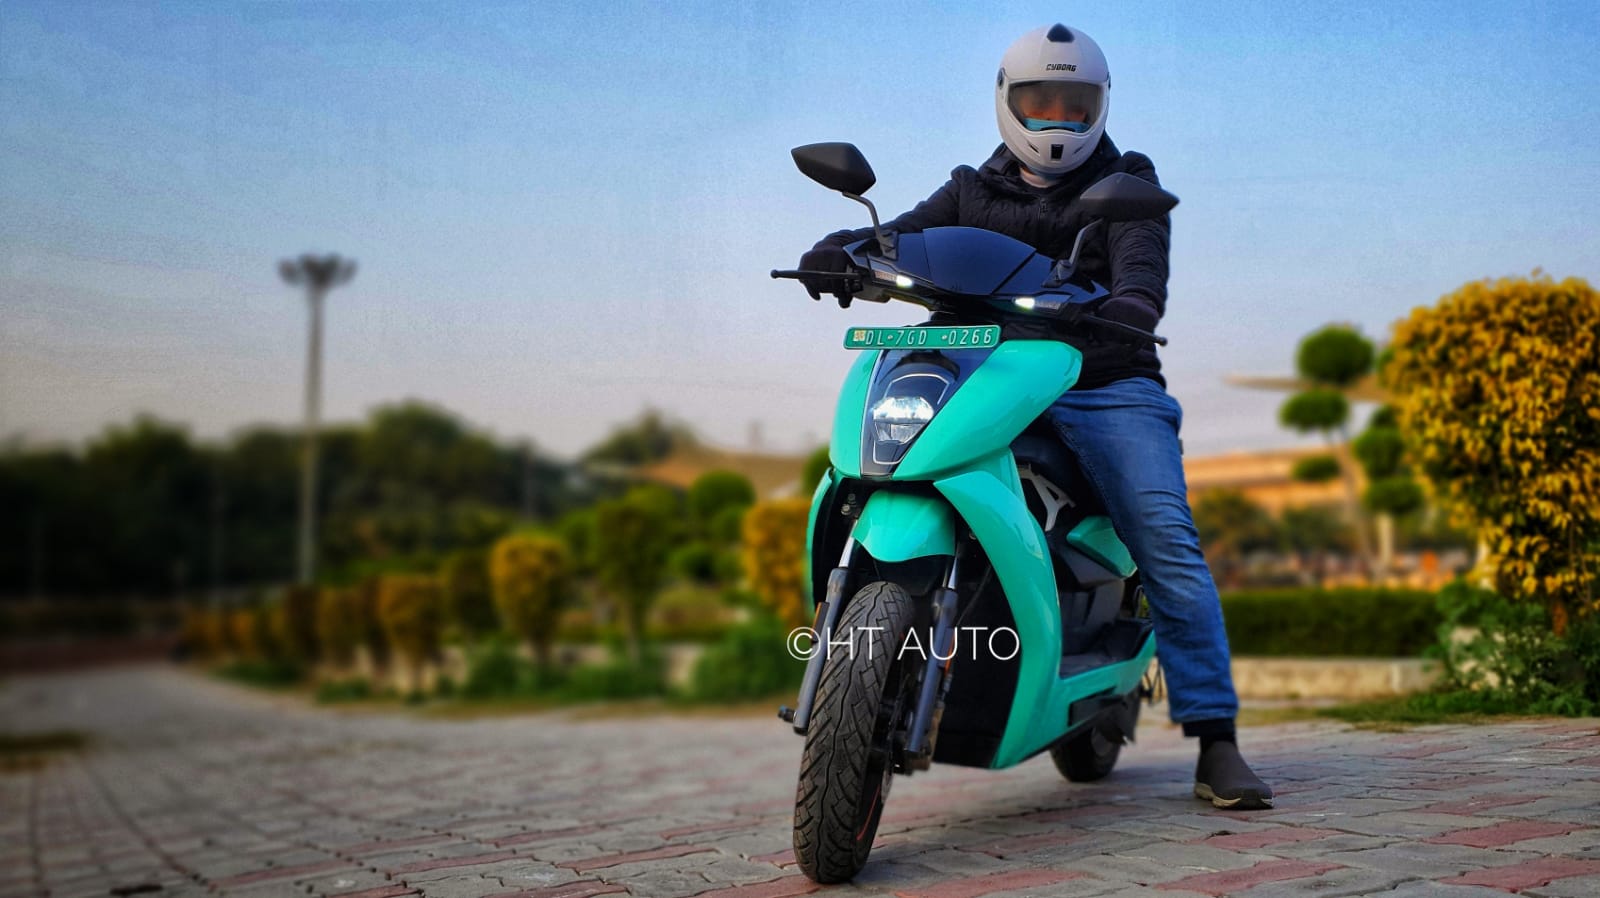 Reverse mode on Ather 450X makes it easy to slide out of parking spots or park the scooter back into garages.